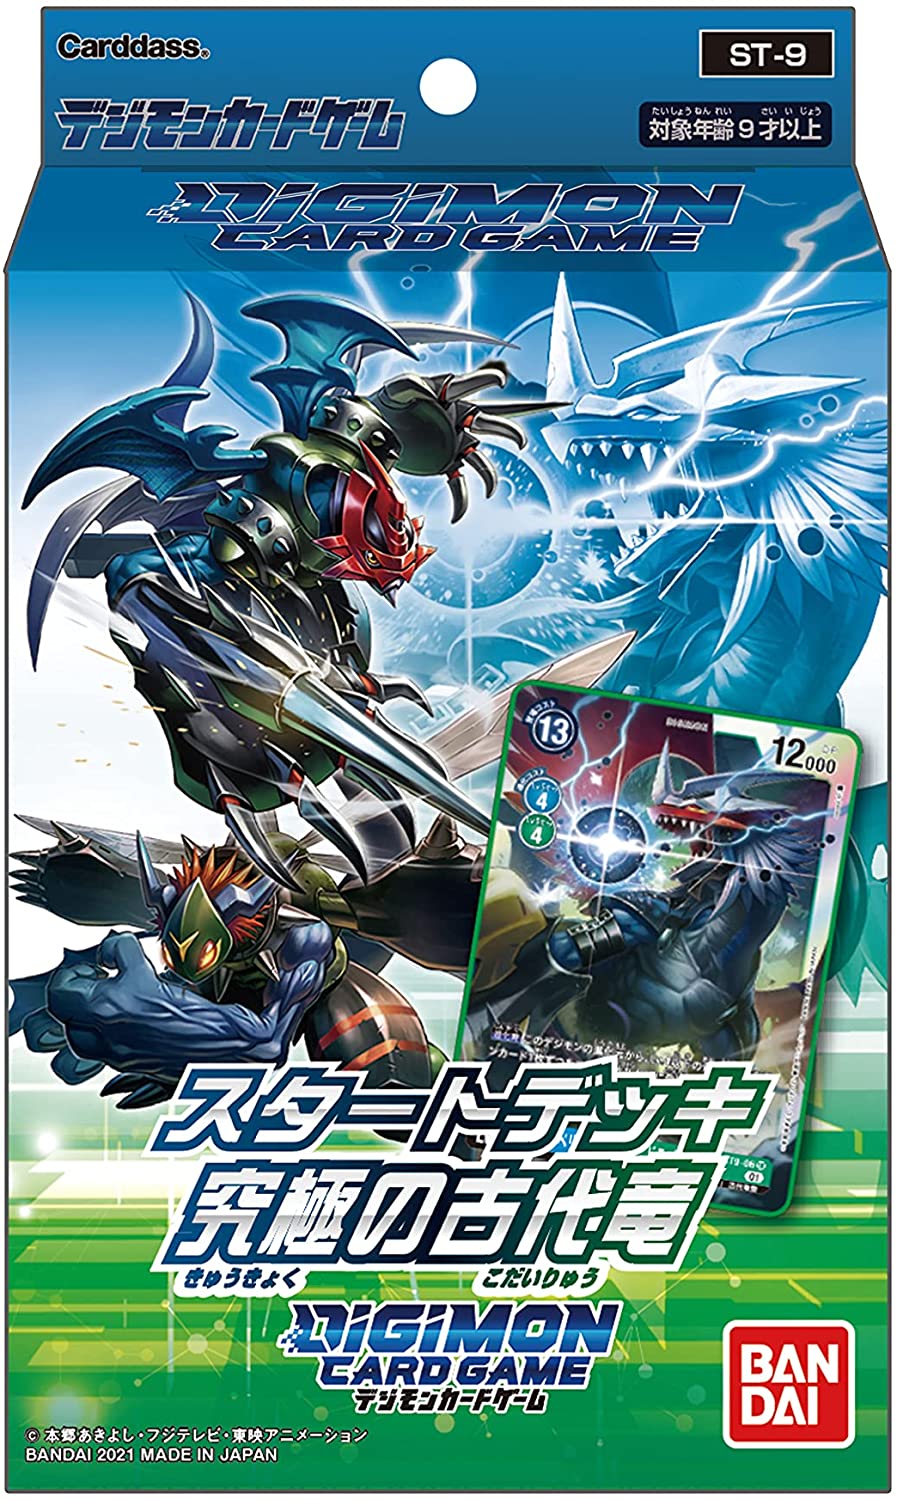 DIGIMON CARD GAME Stater Deck ｢The Ultimate Ancient Dragon｣【ST-9】